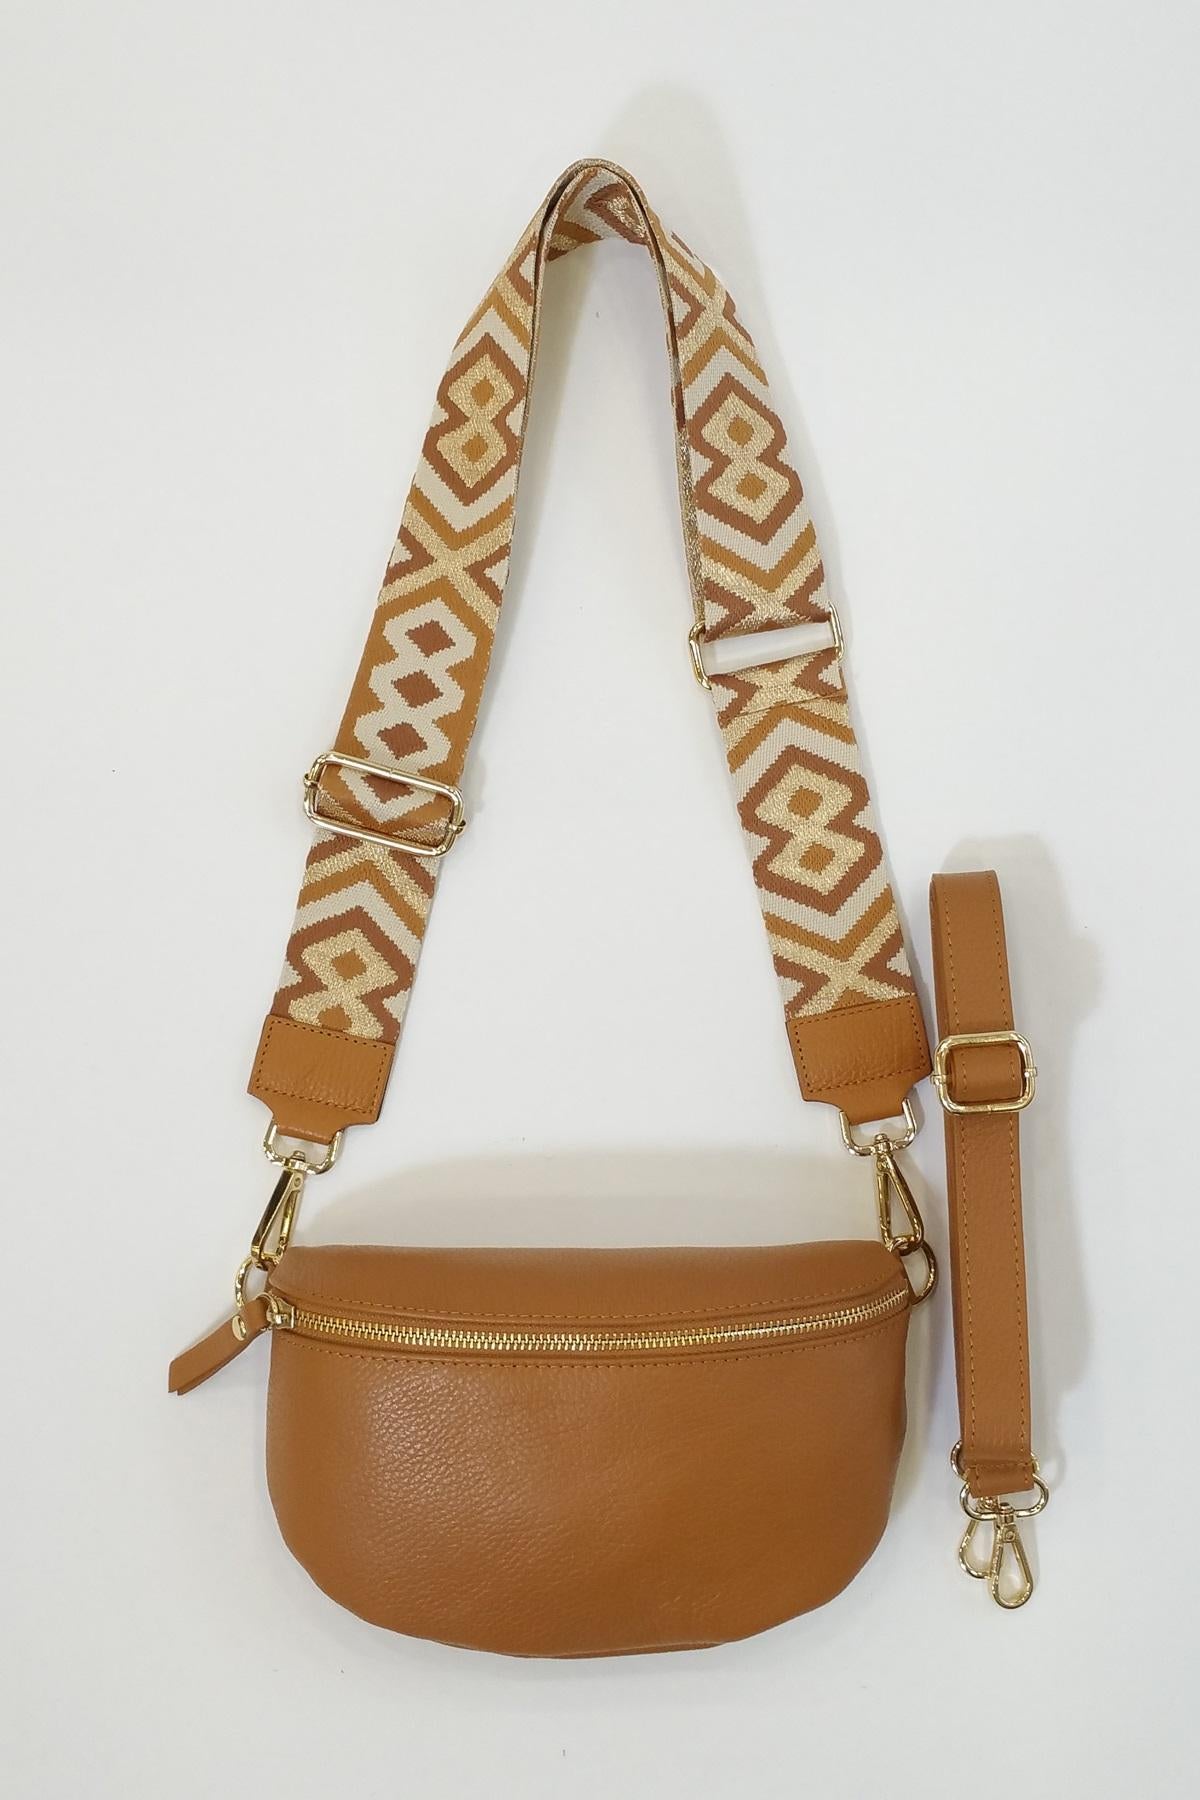 Camel Leather Cross Body Bag With Patterned Strap